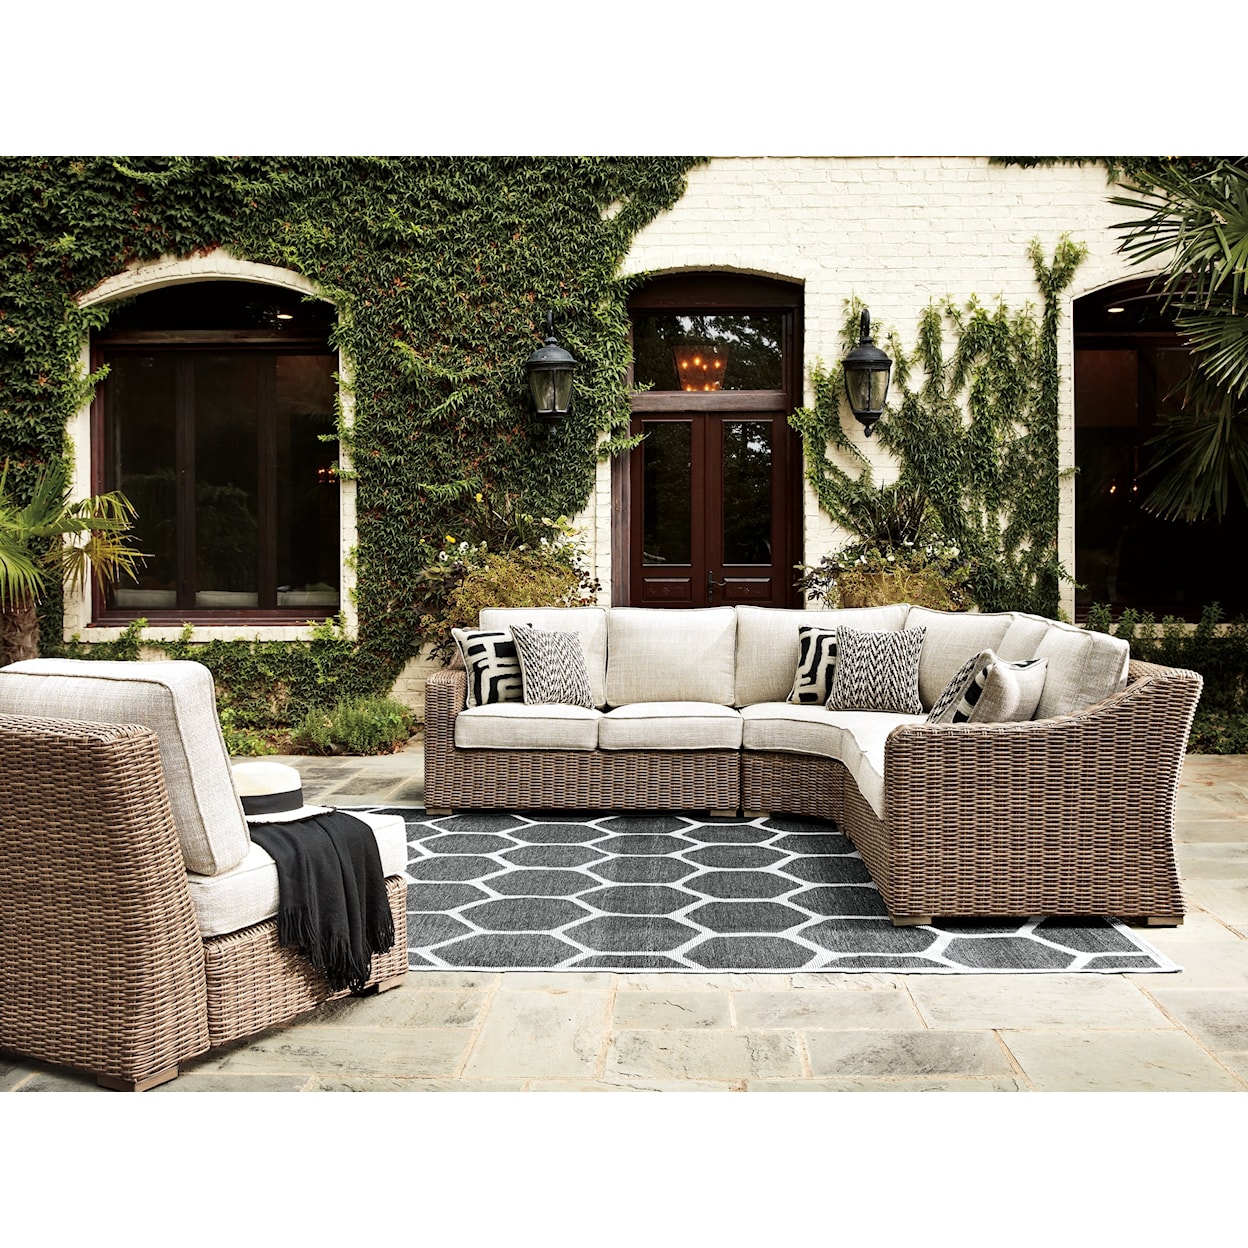 Signature Design by Ashley Beachcroft 4-Piece Outdoor Seating Set